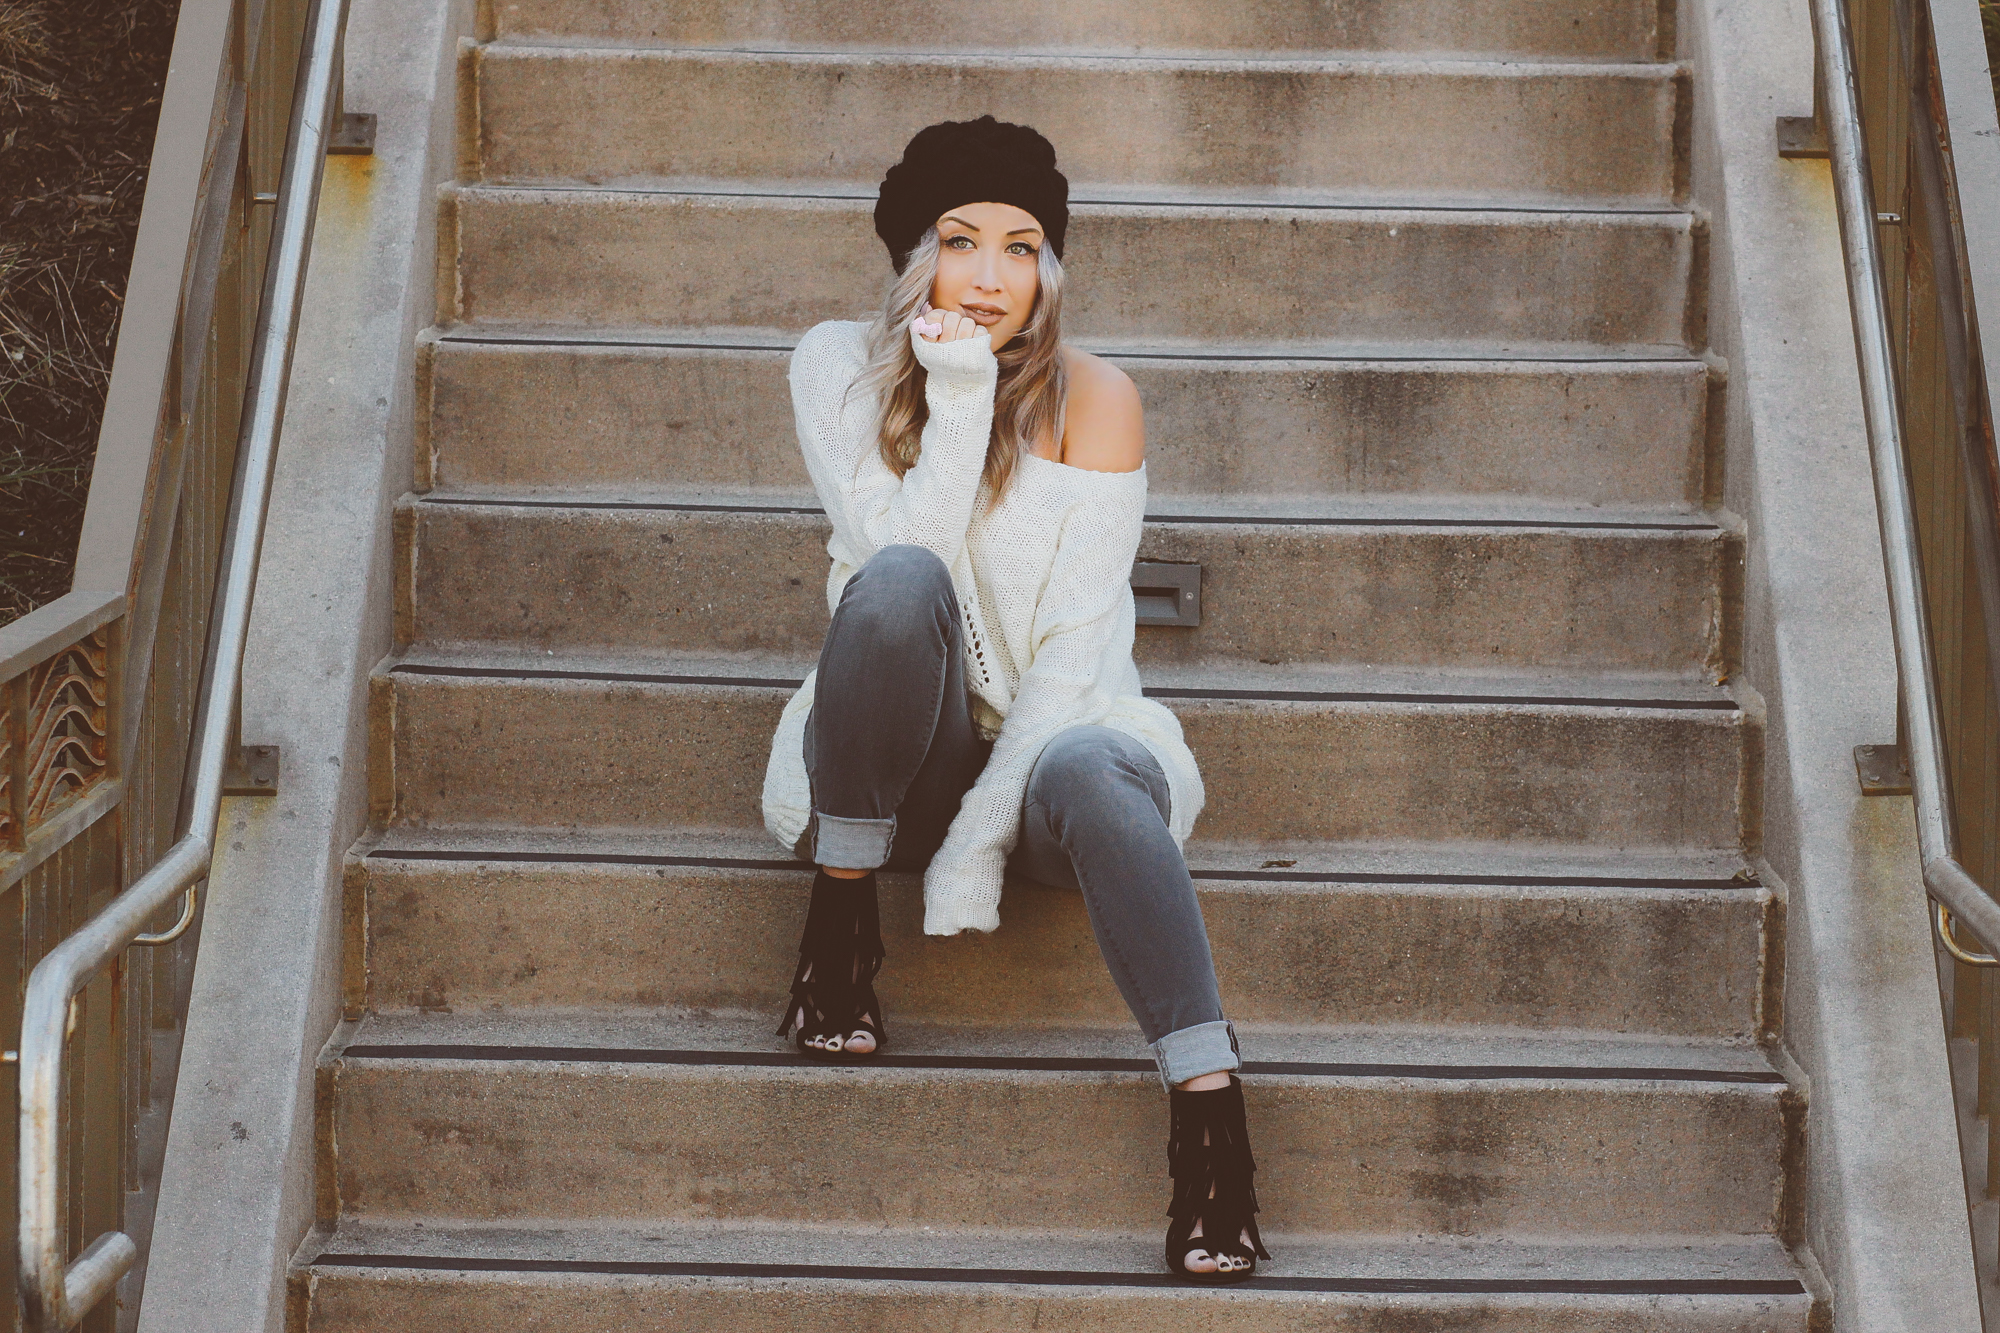 Blondie in the City | Sweater Weather | Off the Shoulder | Beanie Style | Hudson Jeans | Fringe Heels